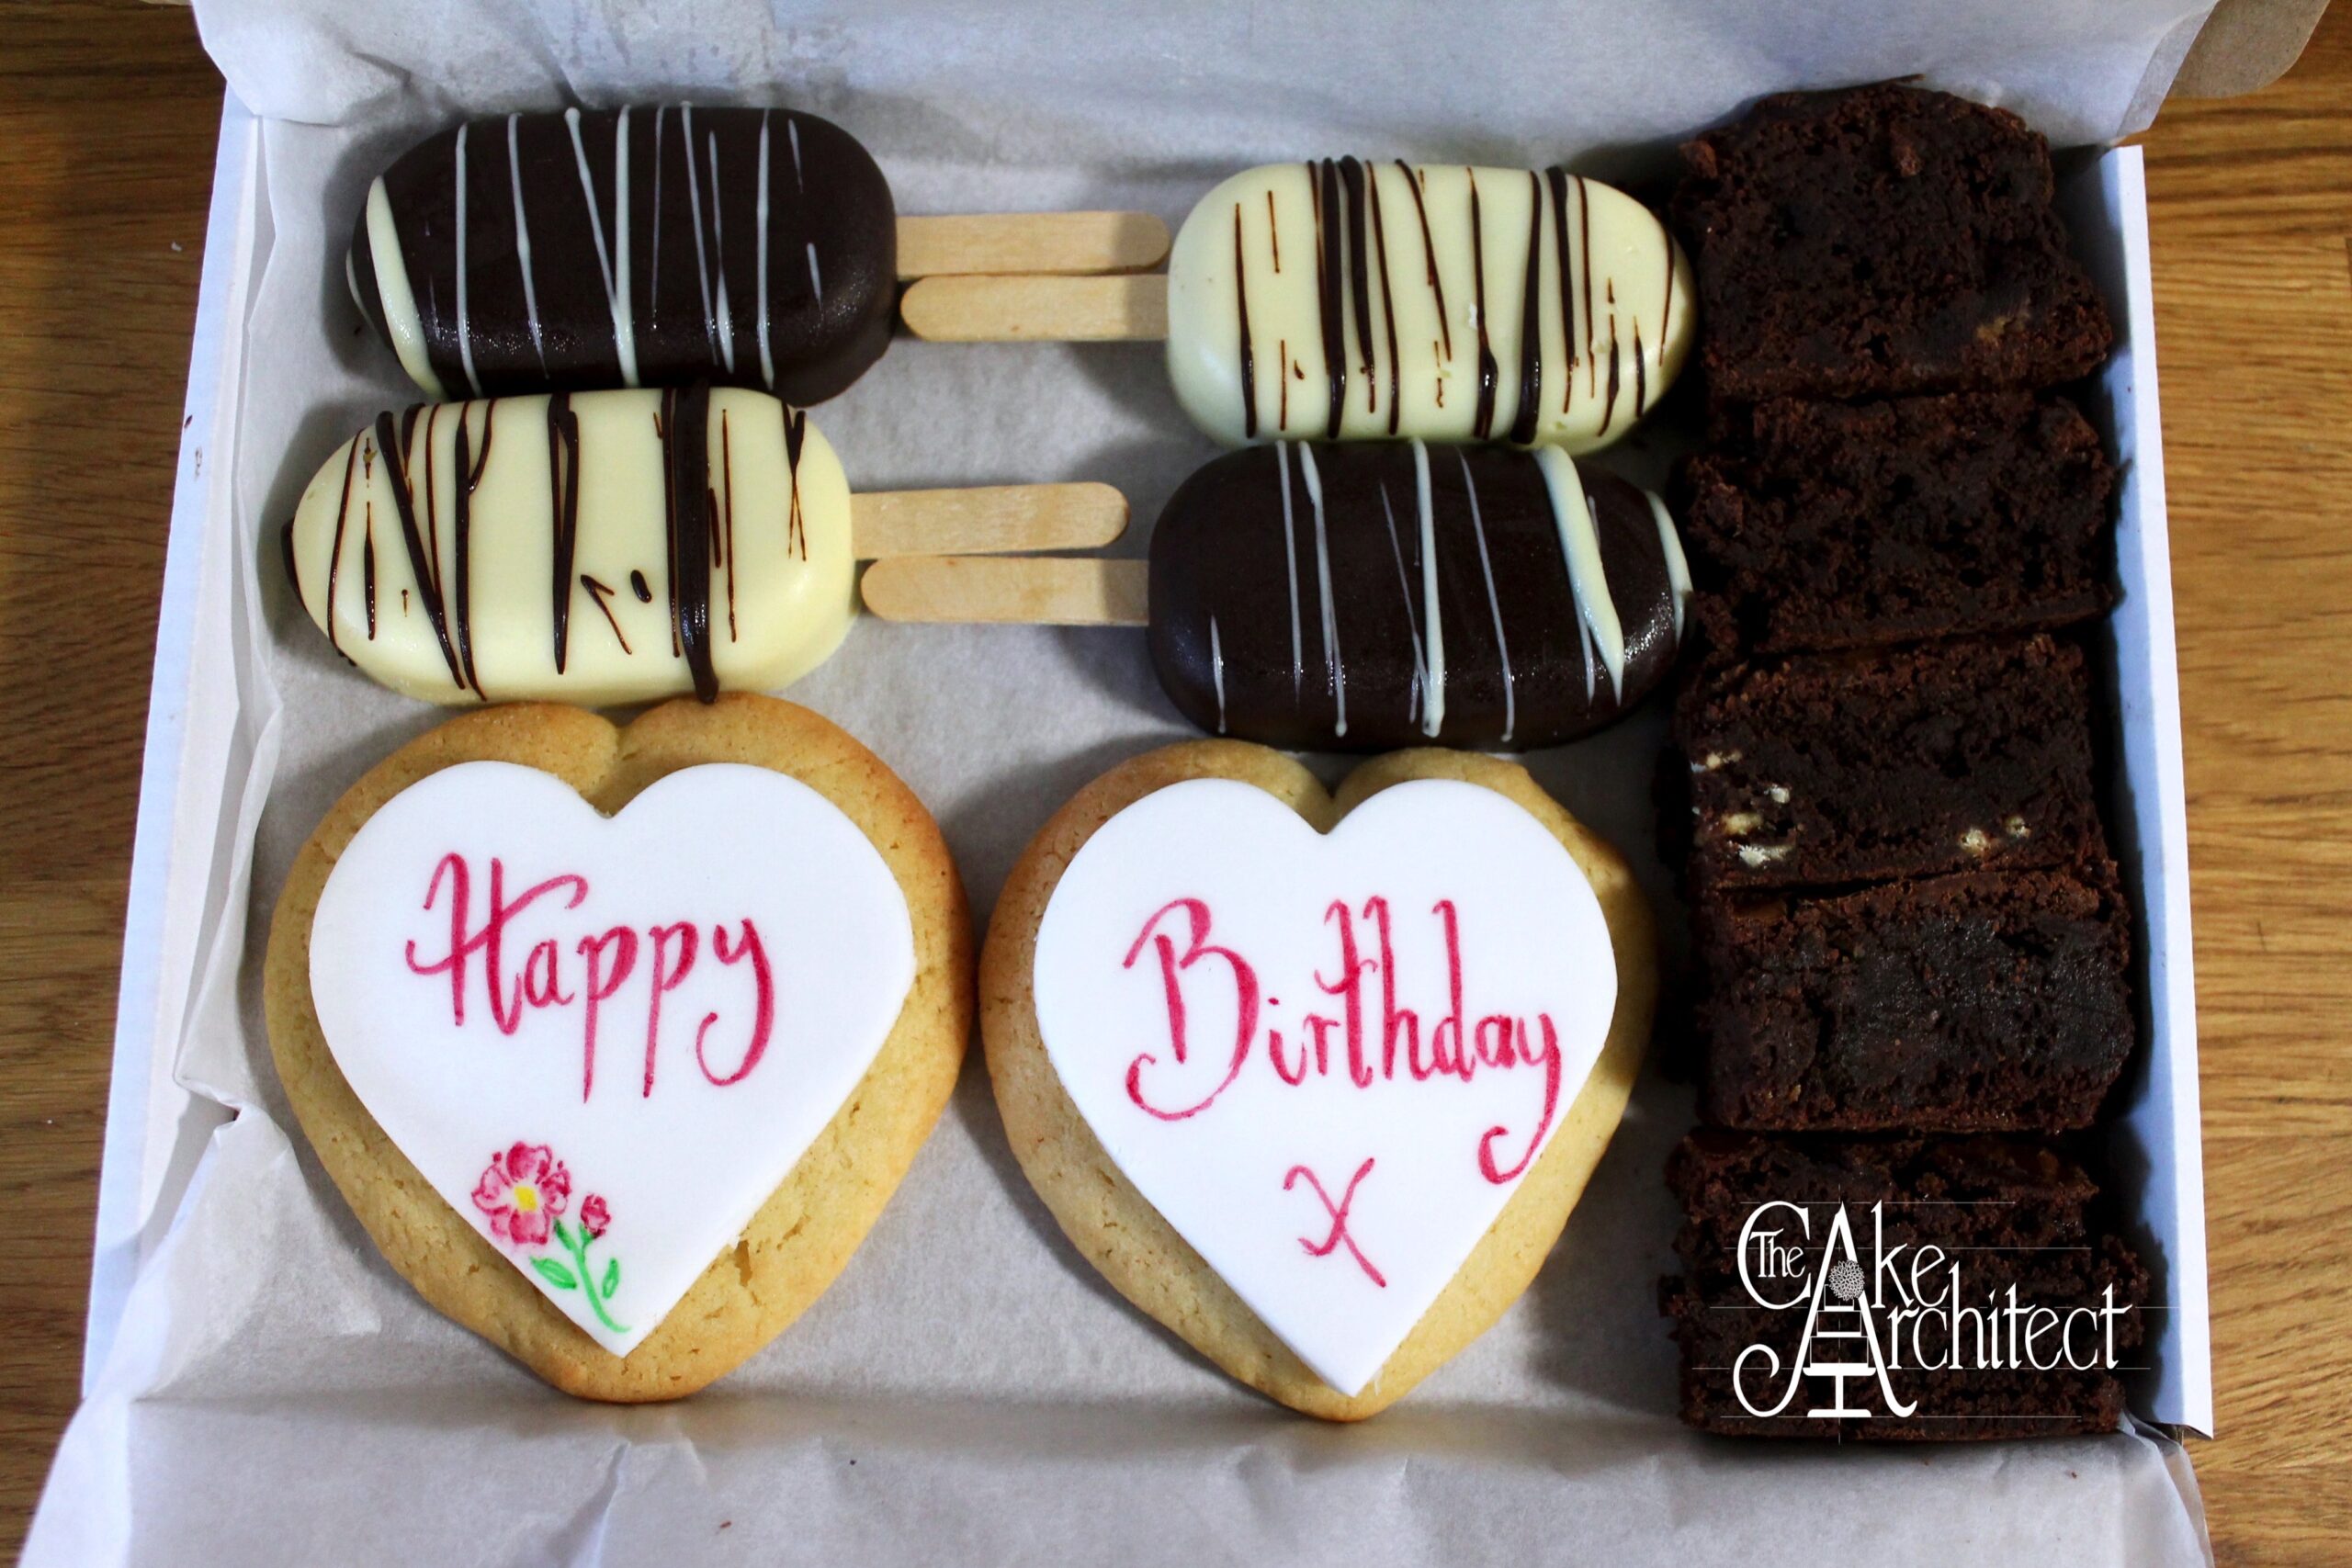 Cakes by post brownies cakesicles bespoke biscuits happy birthday